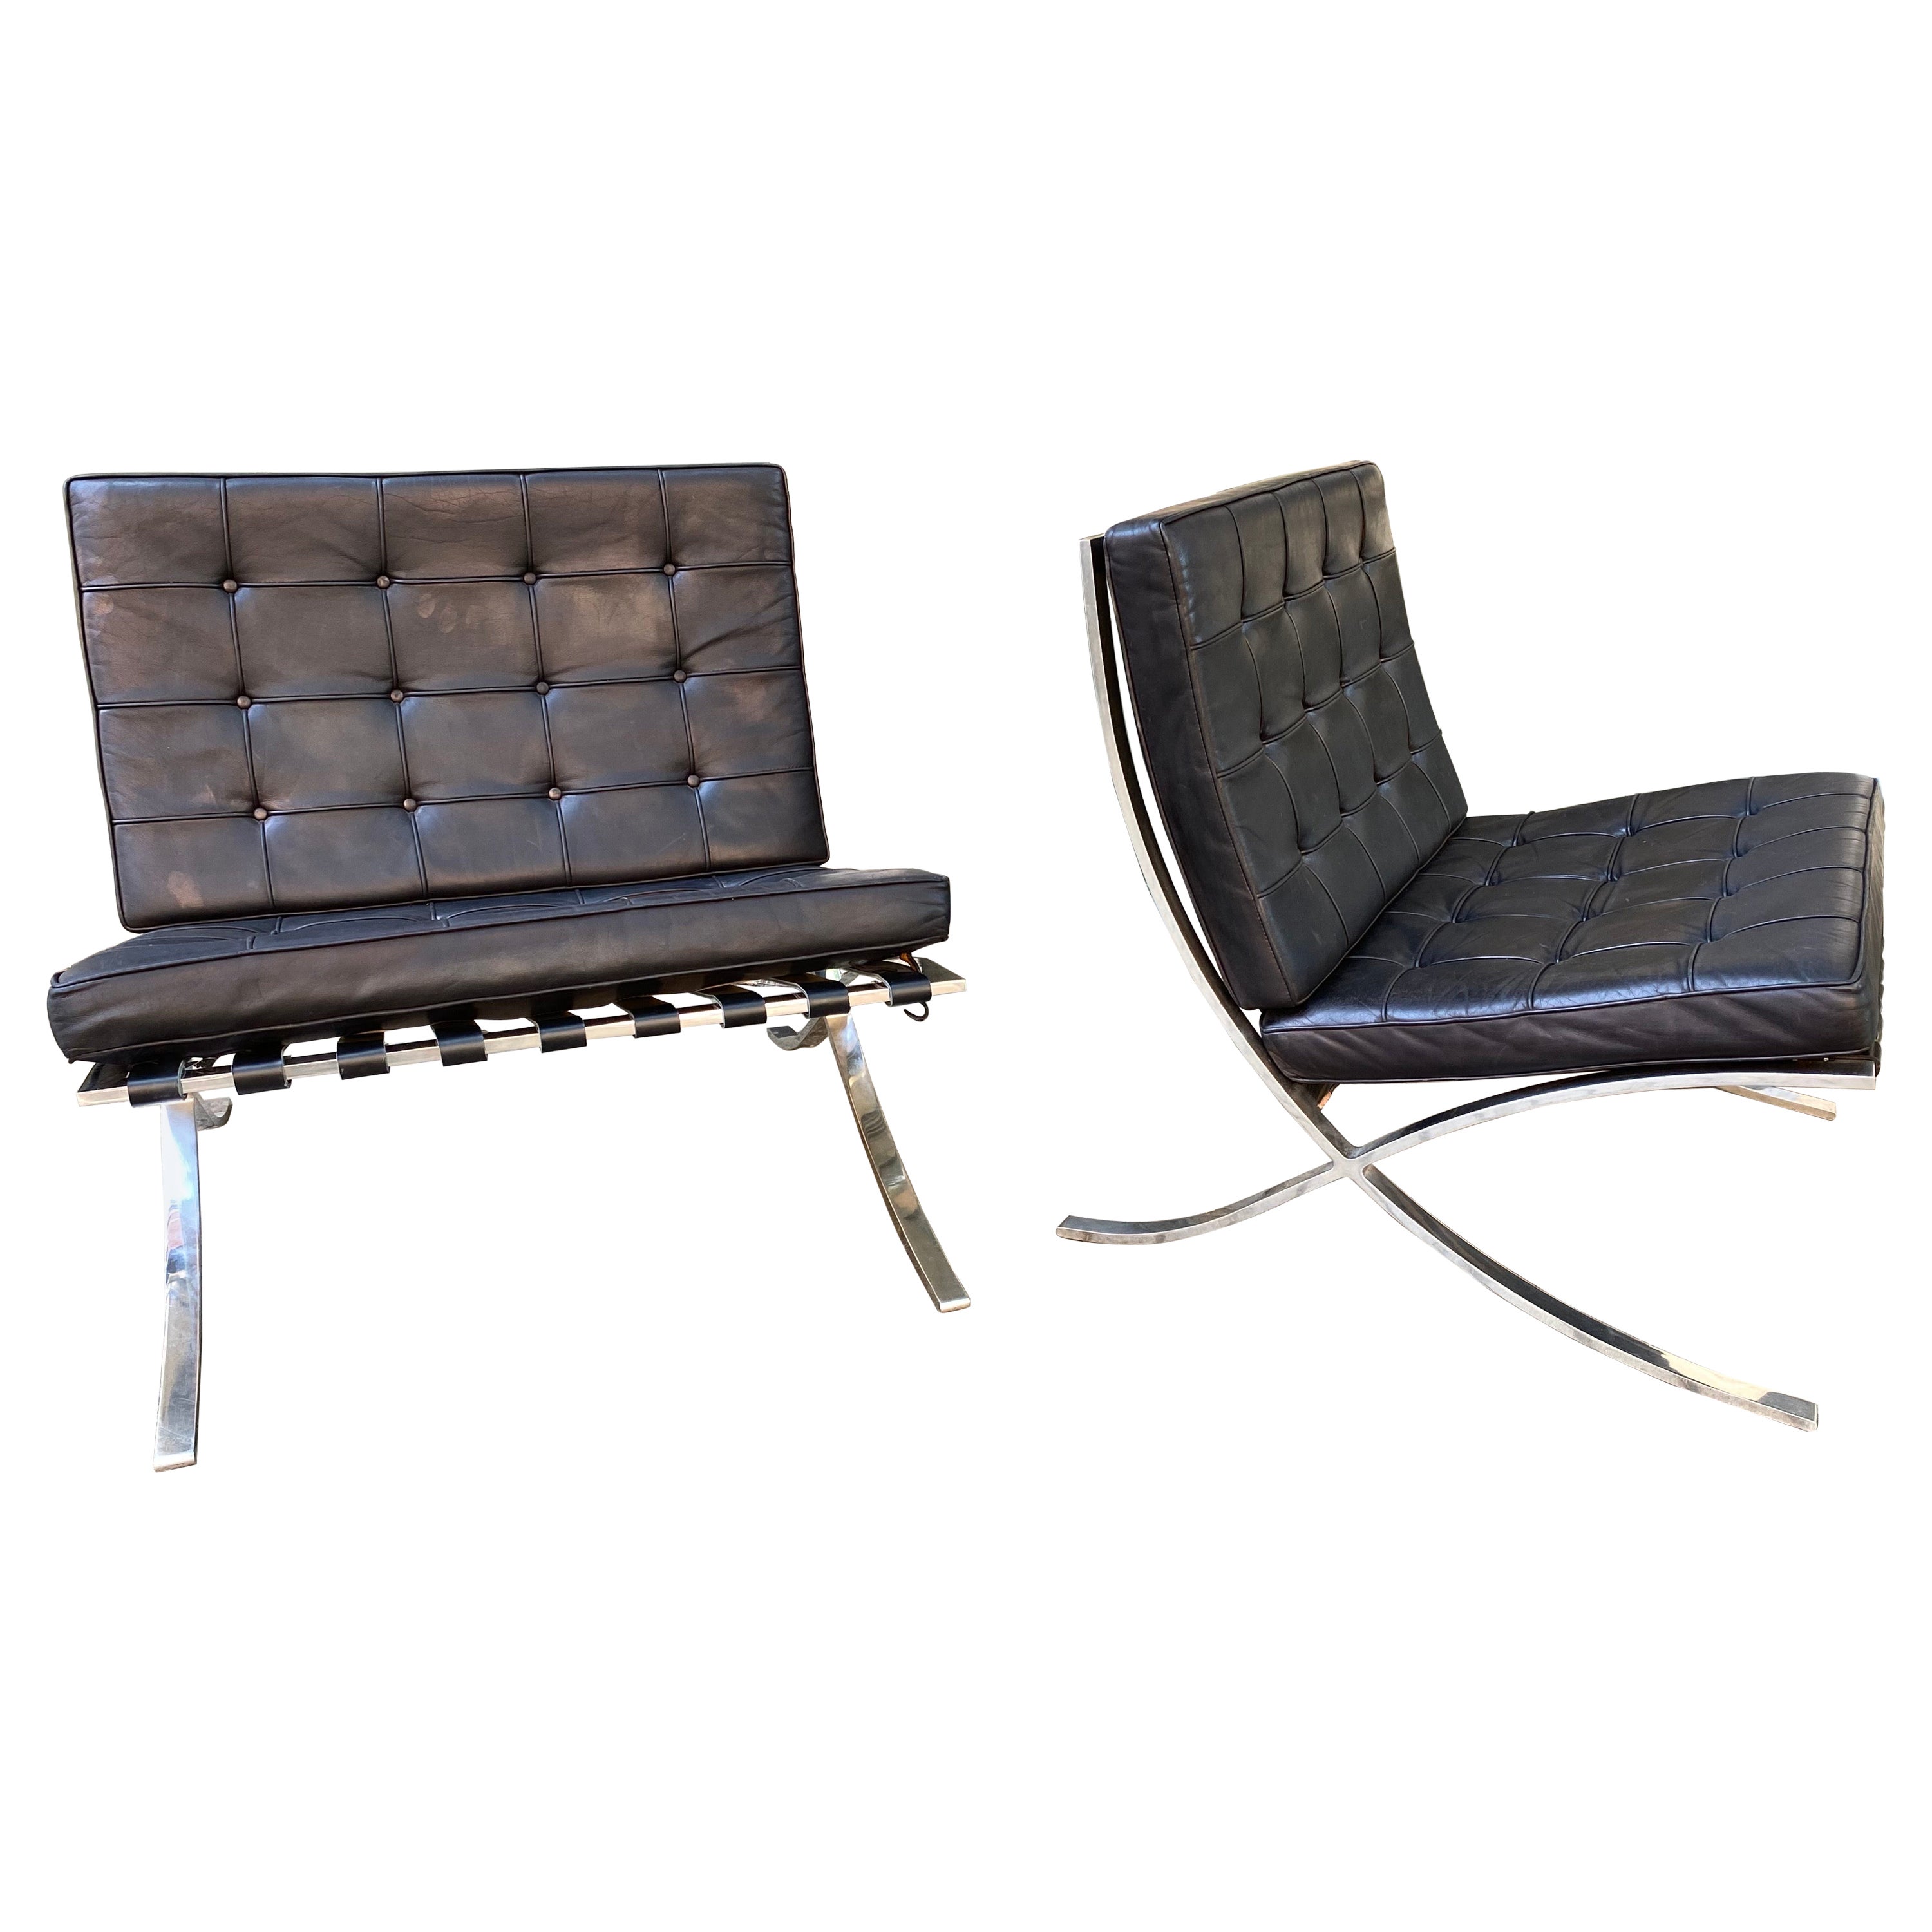 Knoll Mies Van Der Rohe Pair of Barcelona Chairs/ Stainless Steel Frames